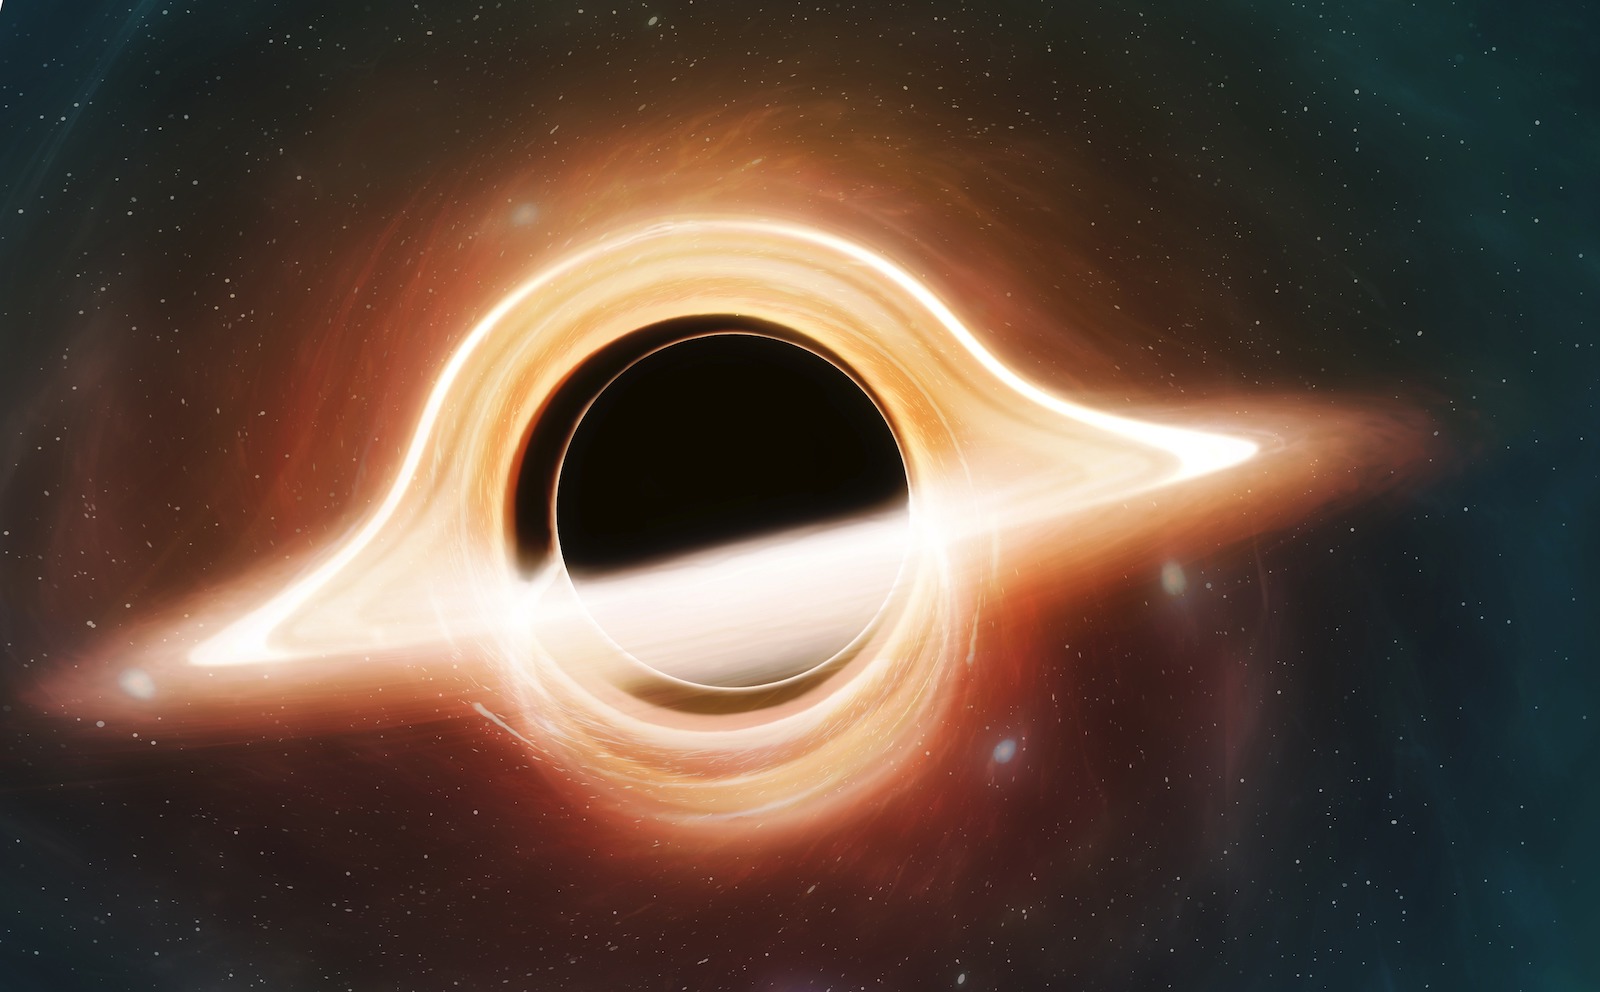 Light from behind a black hole spotted for 1st time, proving Einstein right  | Live Science